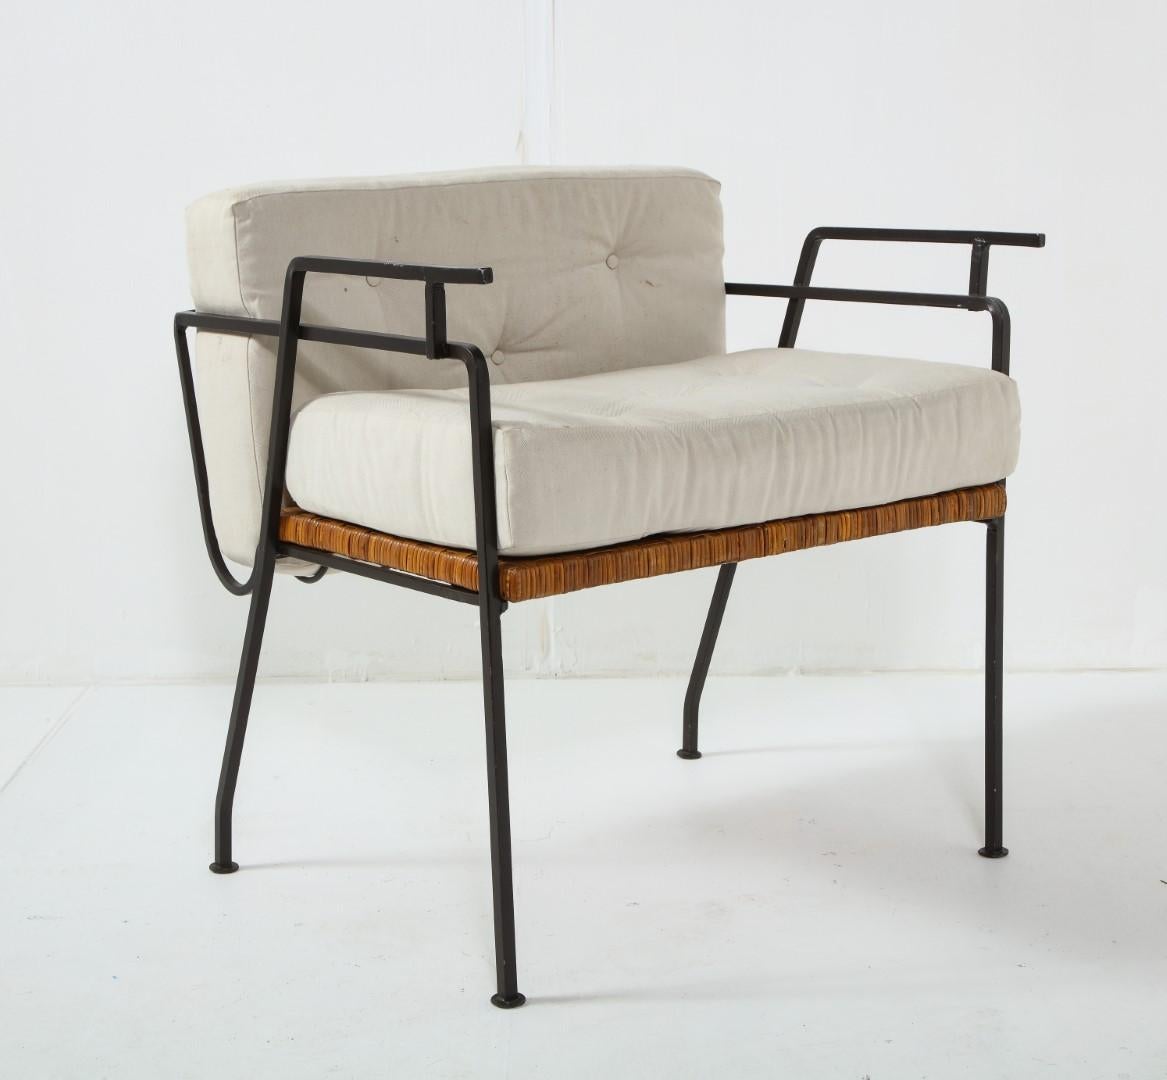 A pair of 1960s wrought iron and cane lounge chairs by Maurizio Tempestini for Salterini. Architectural design with woven rattan and metal elements and tufted white seat and back cushions.